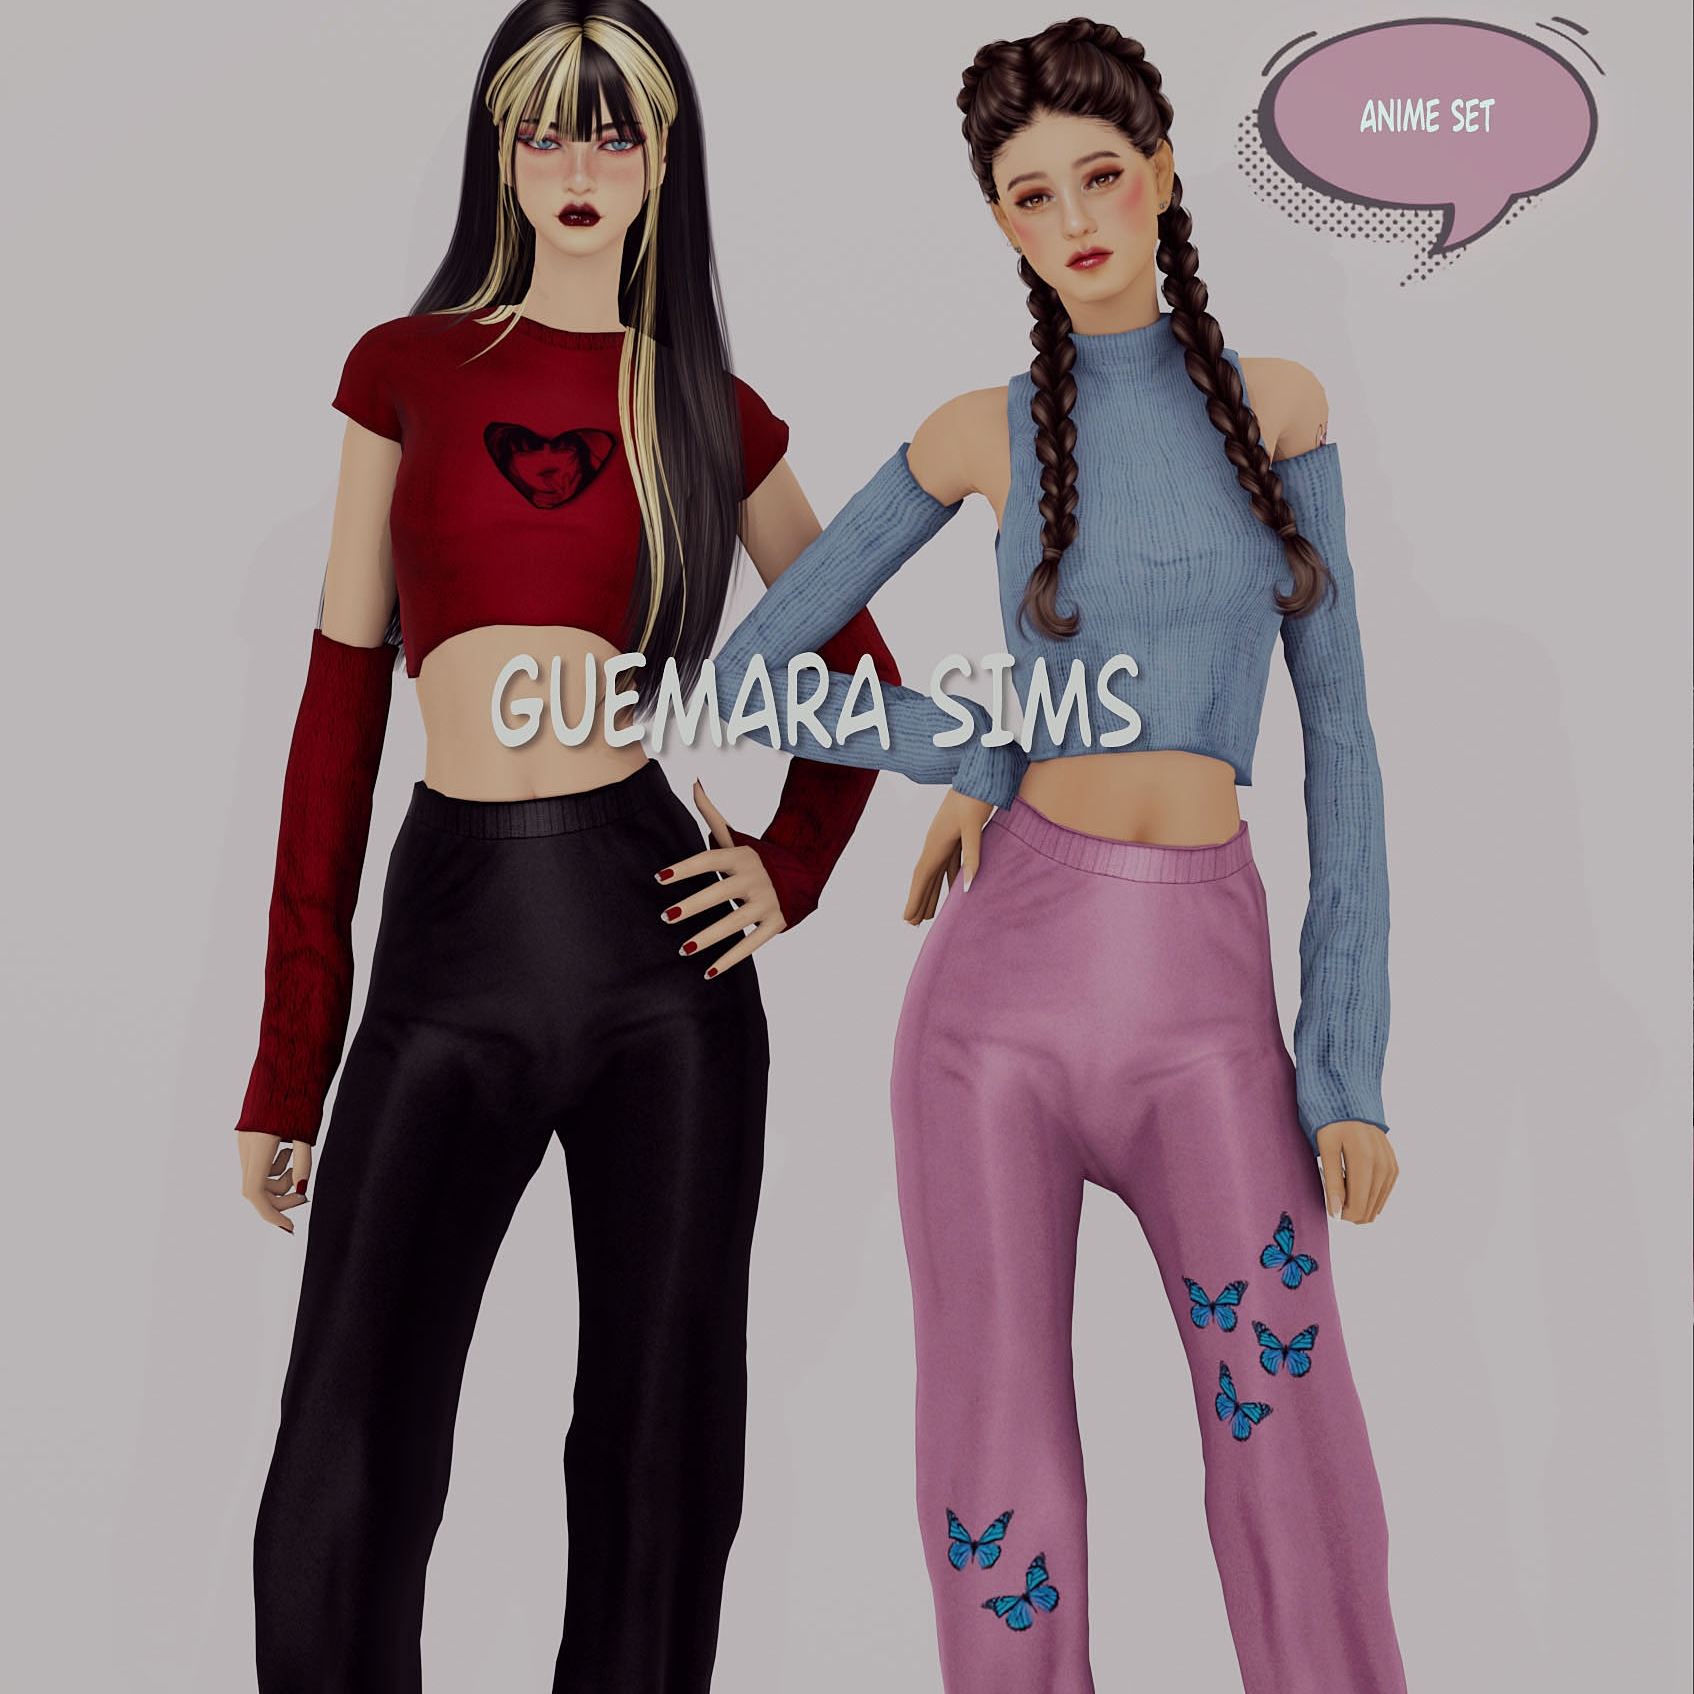 Tried a sort of exaggerated anime-esque style of making sims, thoughts? :  r/Sims4